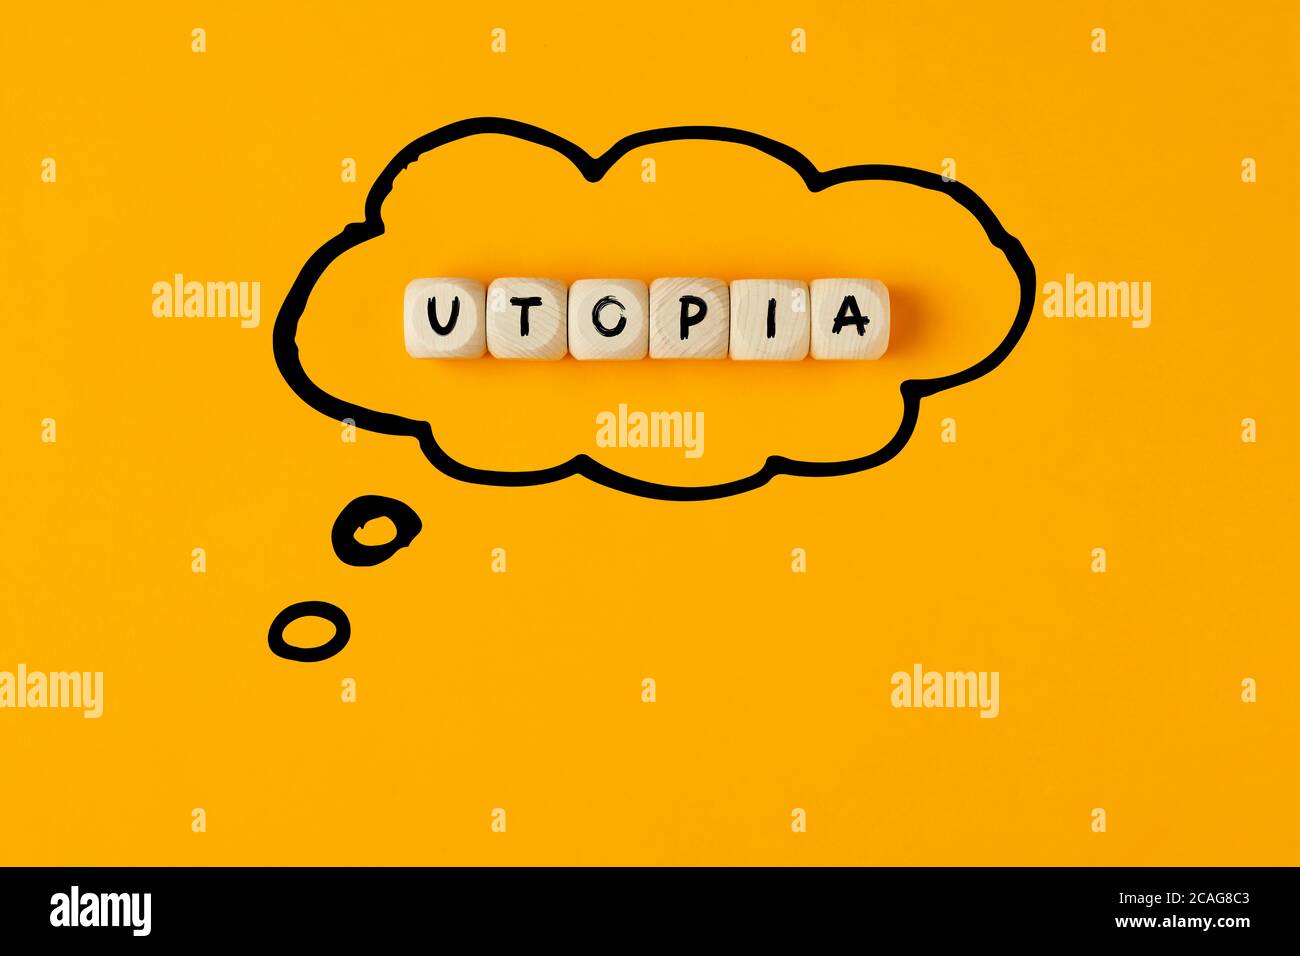 The word utopia written on wooden cubes framed with a thought bubble. Concept of thinking or dreaming of an utopia. Stock Photo